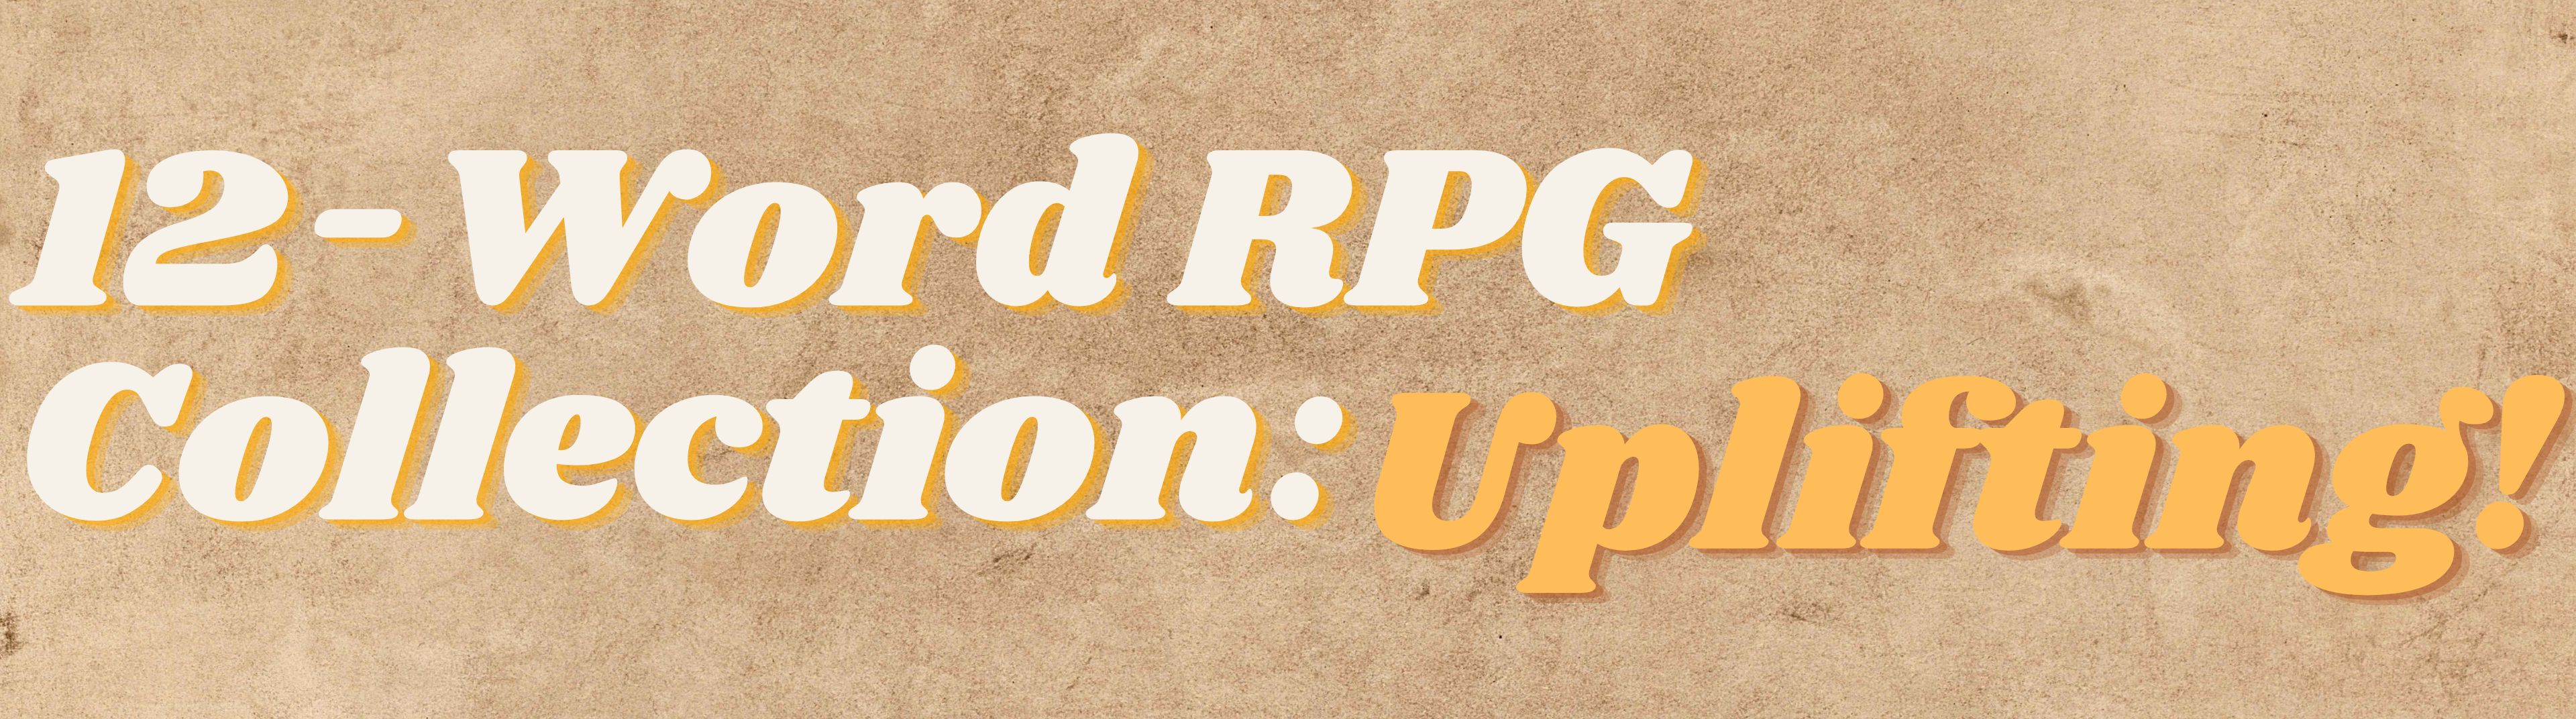 12-Word RPG Collection: Uplifting!